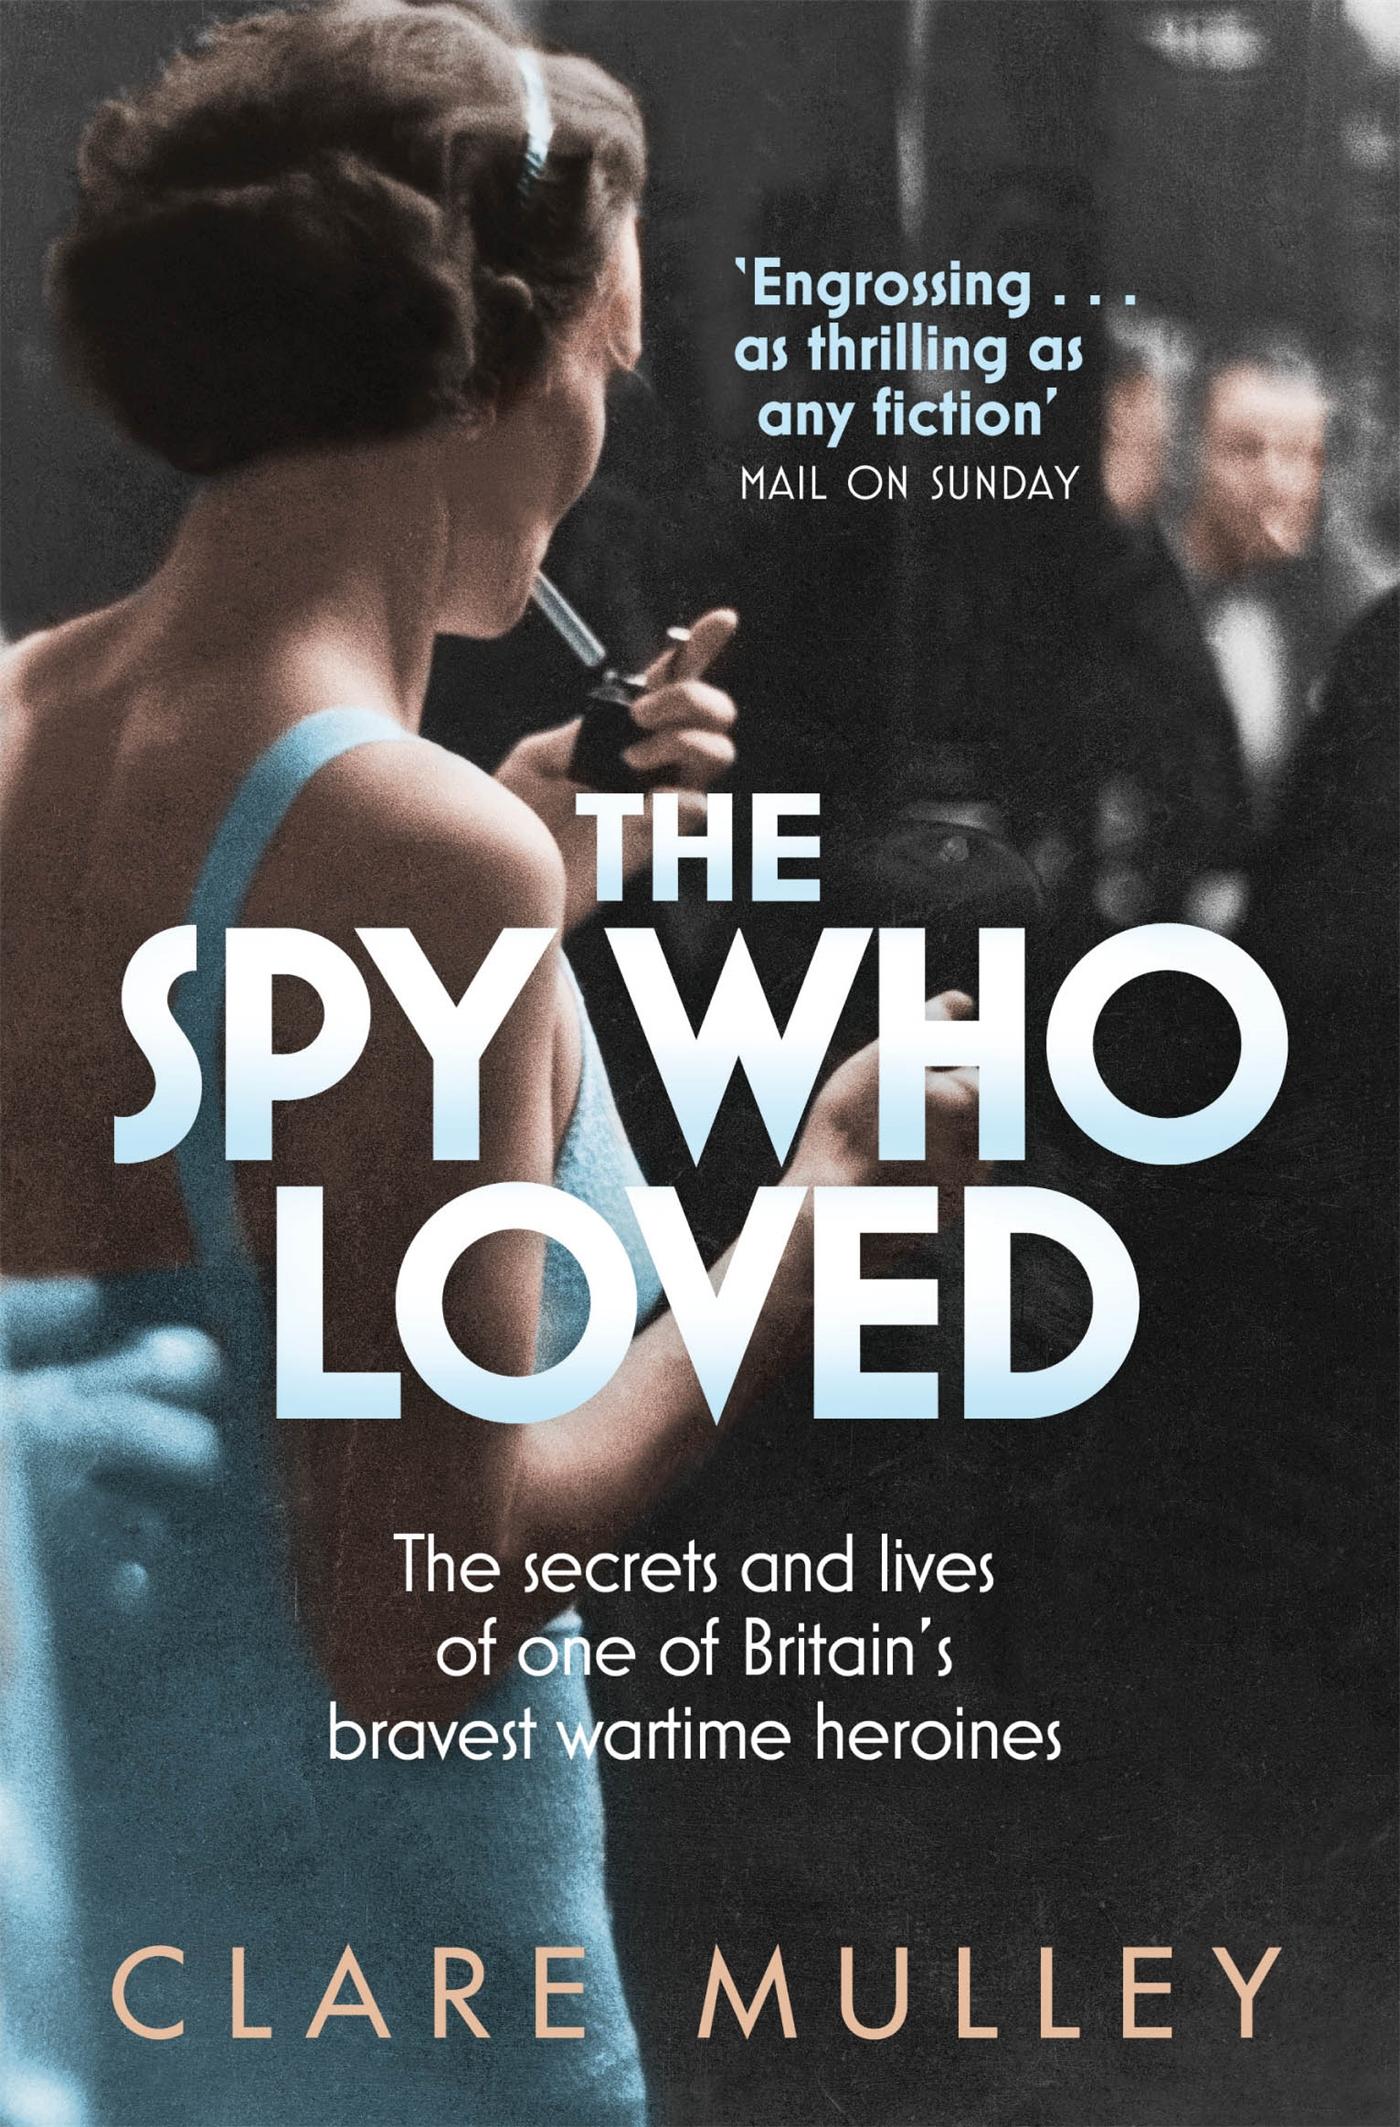 The Spy Who Loved / the secrets and lives of one of Britain's bravest wartime heroines / Clare Mulley / Taschenbuch / Kartoniert / Broschiert / Englisch / 2013 / Pan Macmillan / EAN 9781447201182 - Mulley, Clare